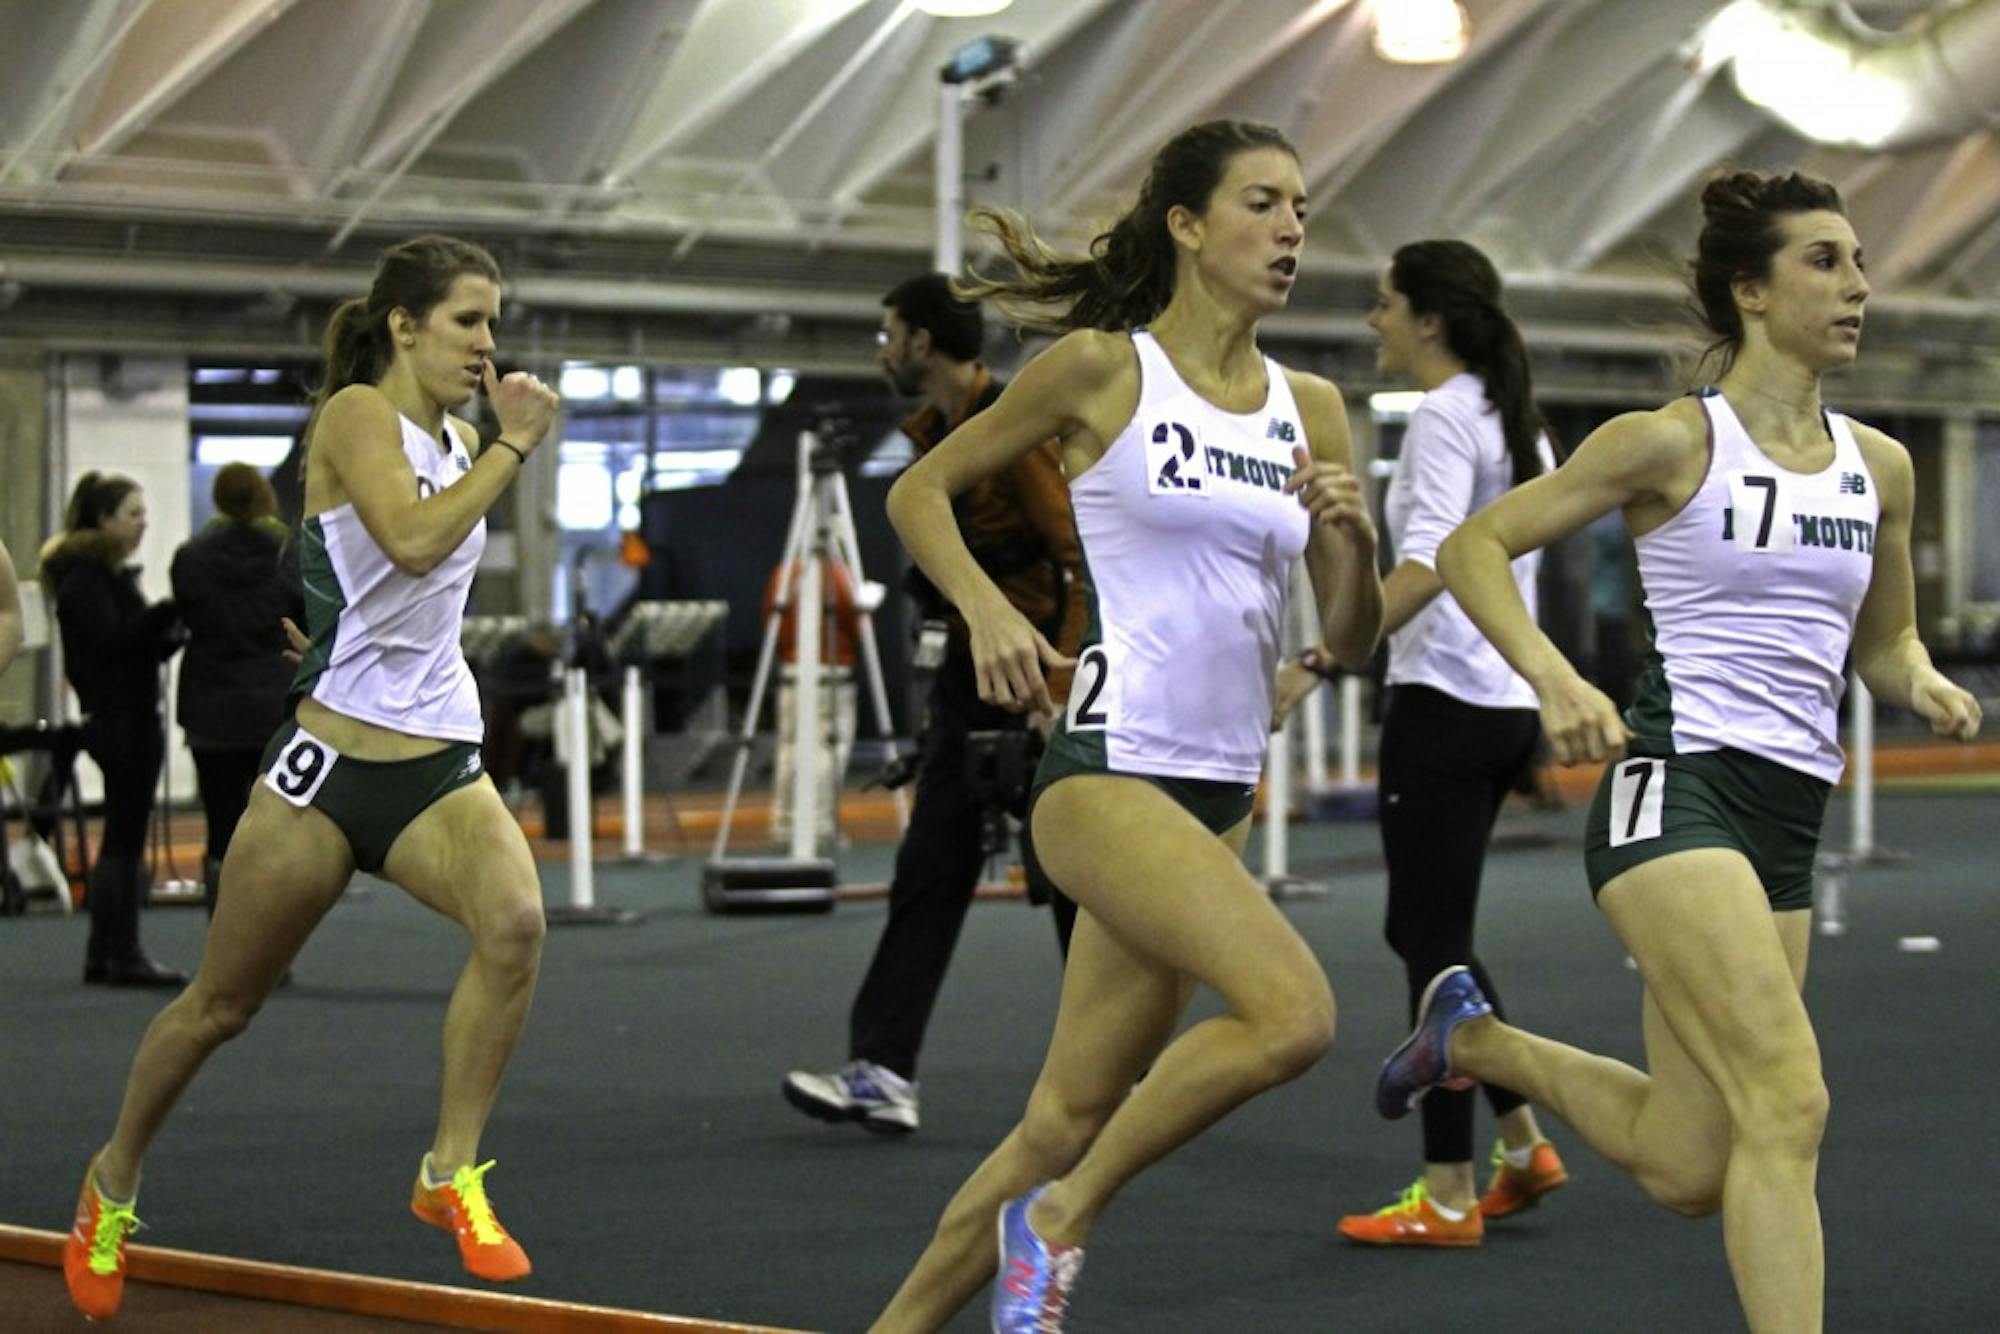 The women's track team raced toward a second place finish at the Carisella Invitational over winter break.